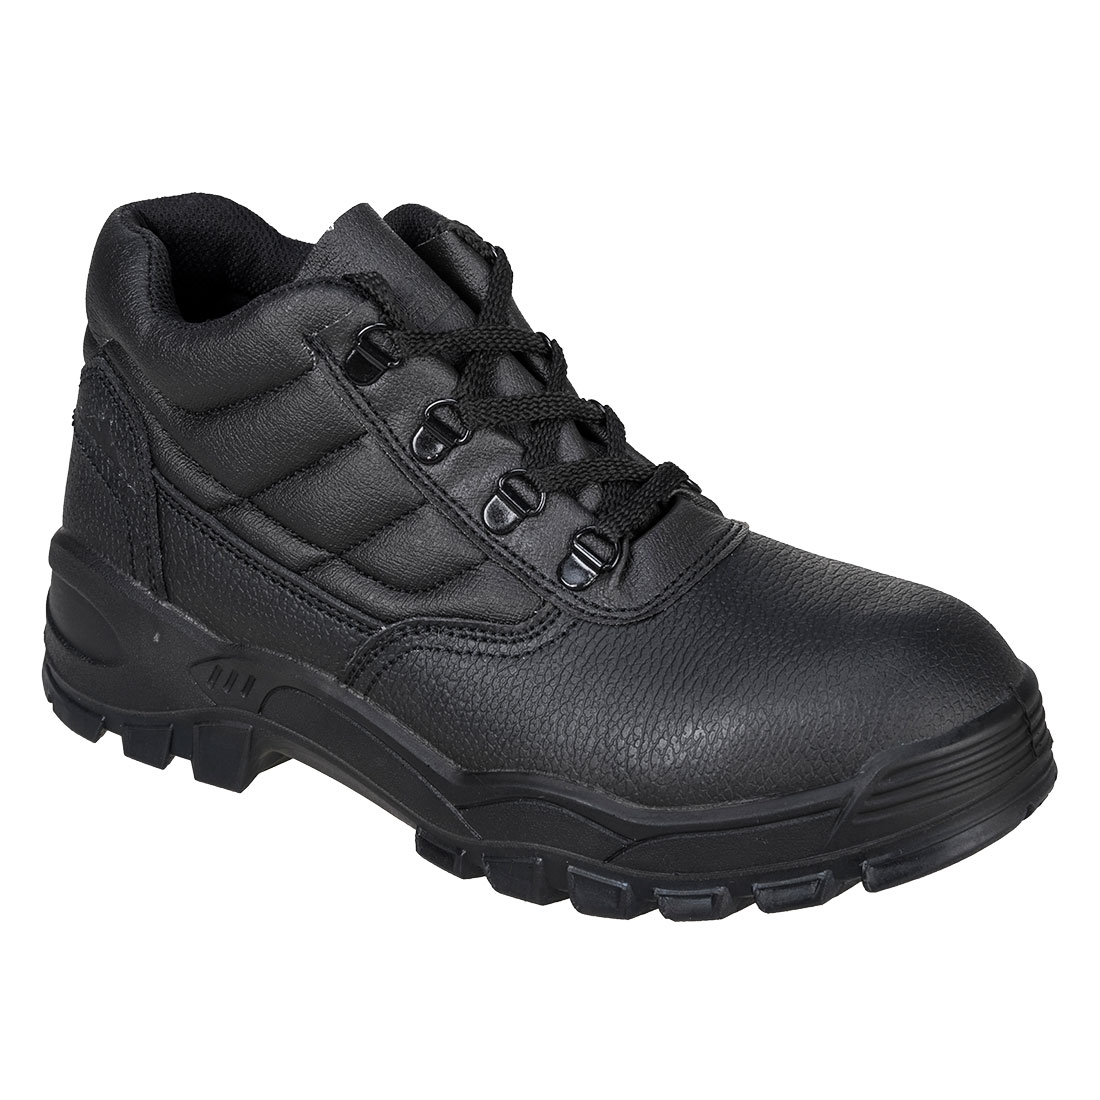 Work Boot O1 Black – 9 – Work Safety Protective Equipment – Portwest – Regus Supply